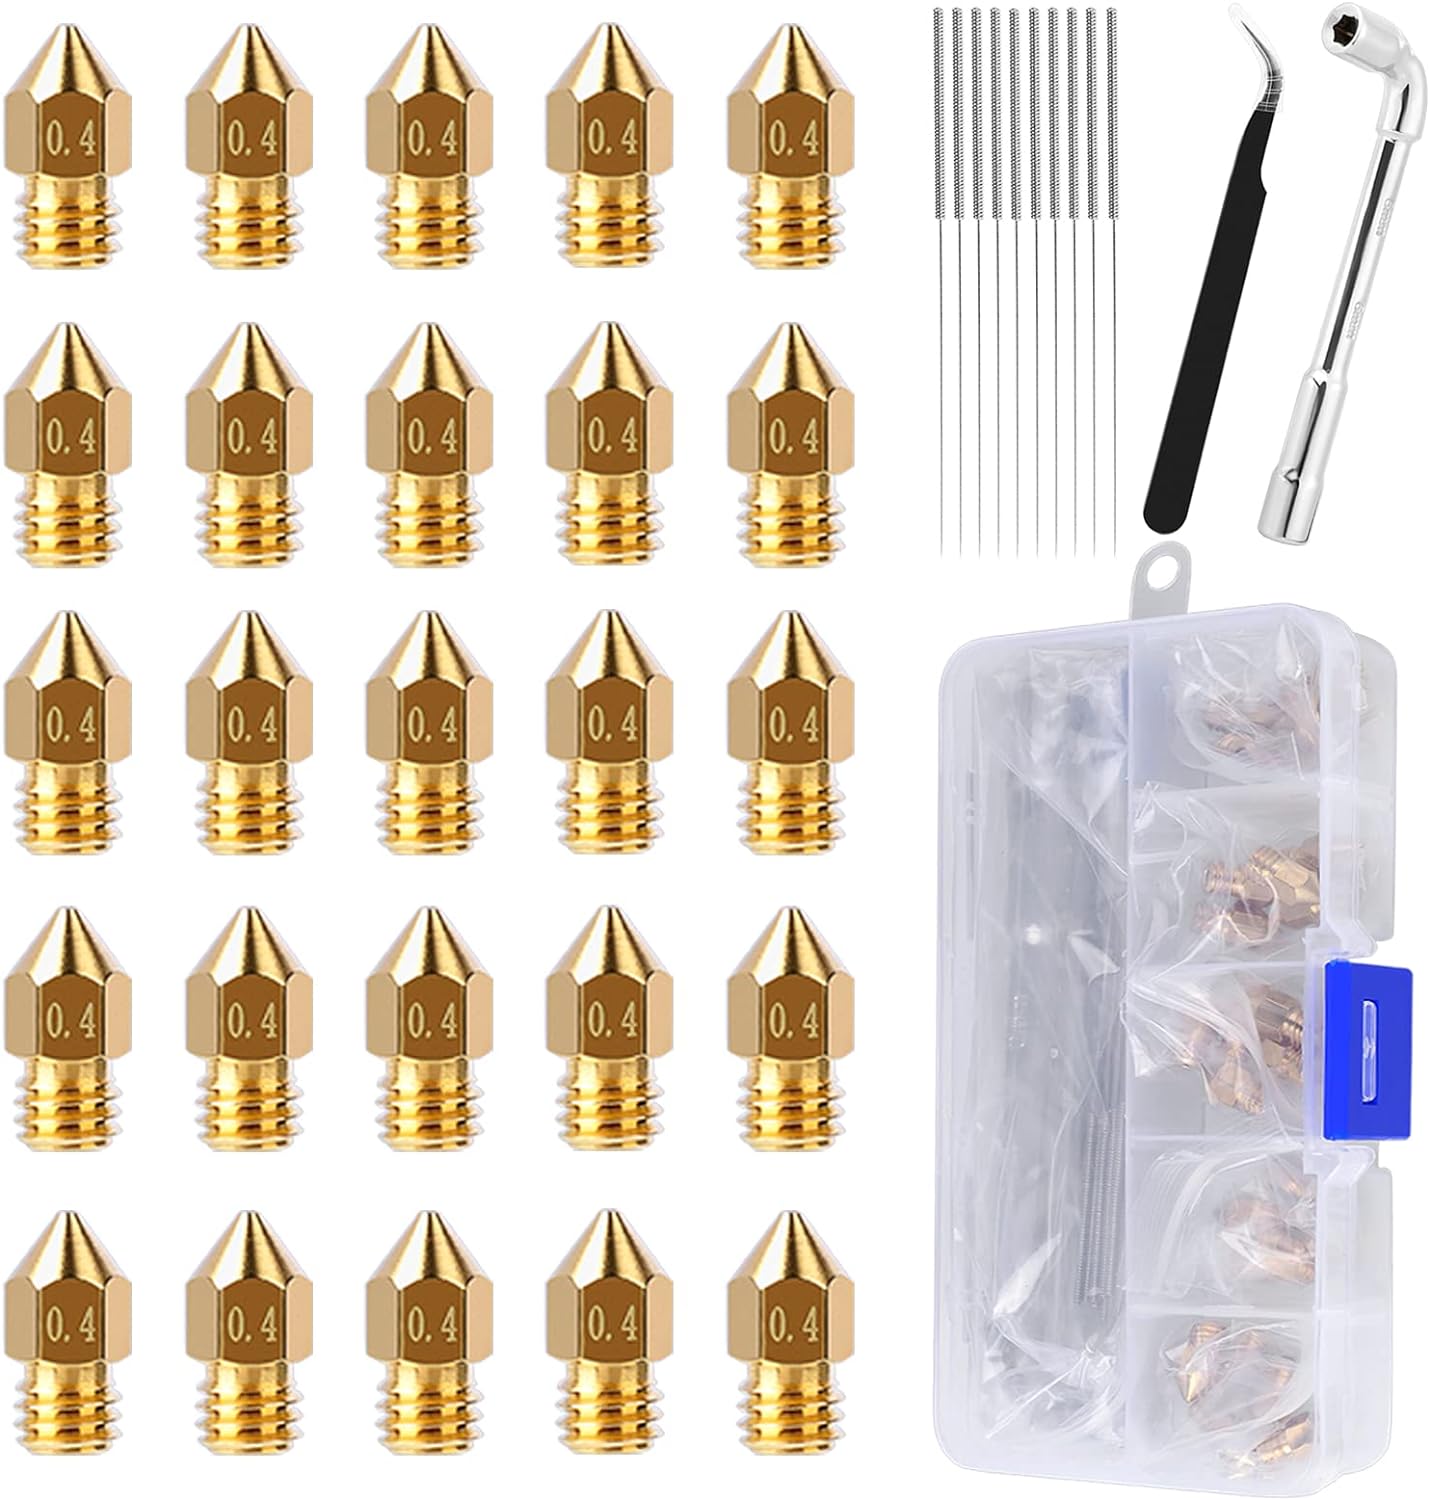 comgrow-25pcs-mk8-ender-3-v2-nozzles-04mm-3d-printer-brass-hotend-nozzles-with-diy-tools-storage-box-for-creality-ender- Comgrow Nozzles 0.4MM Review